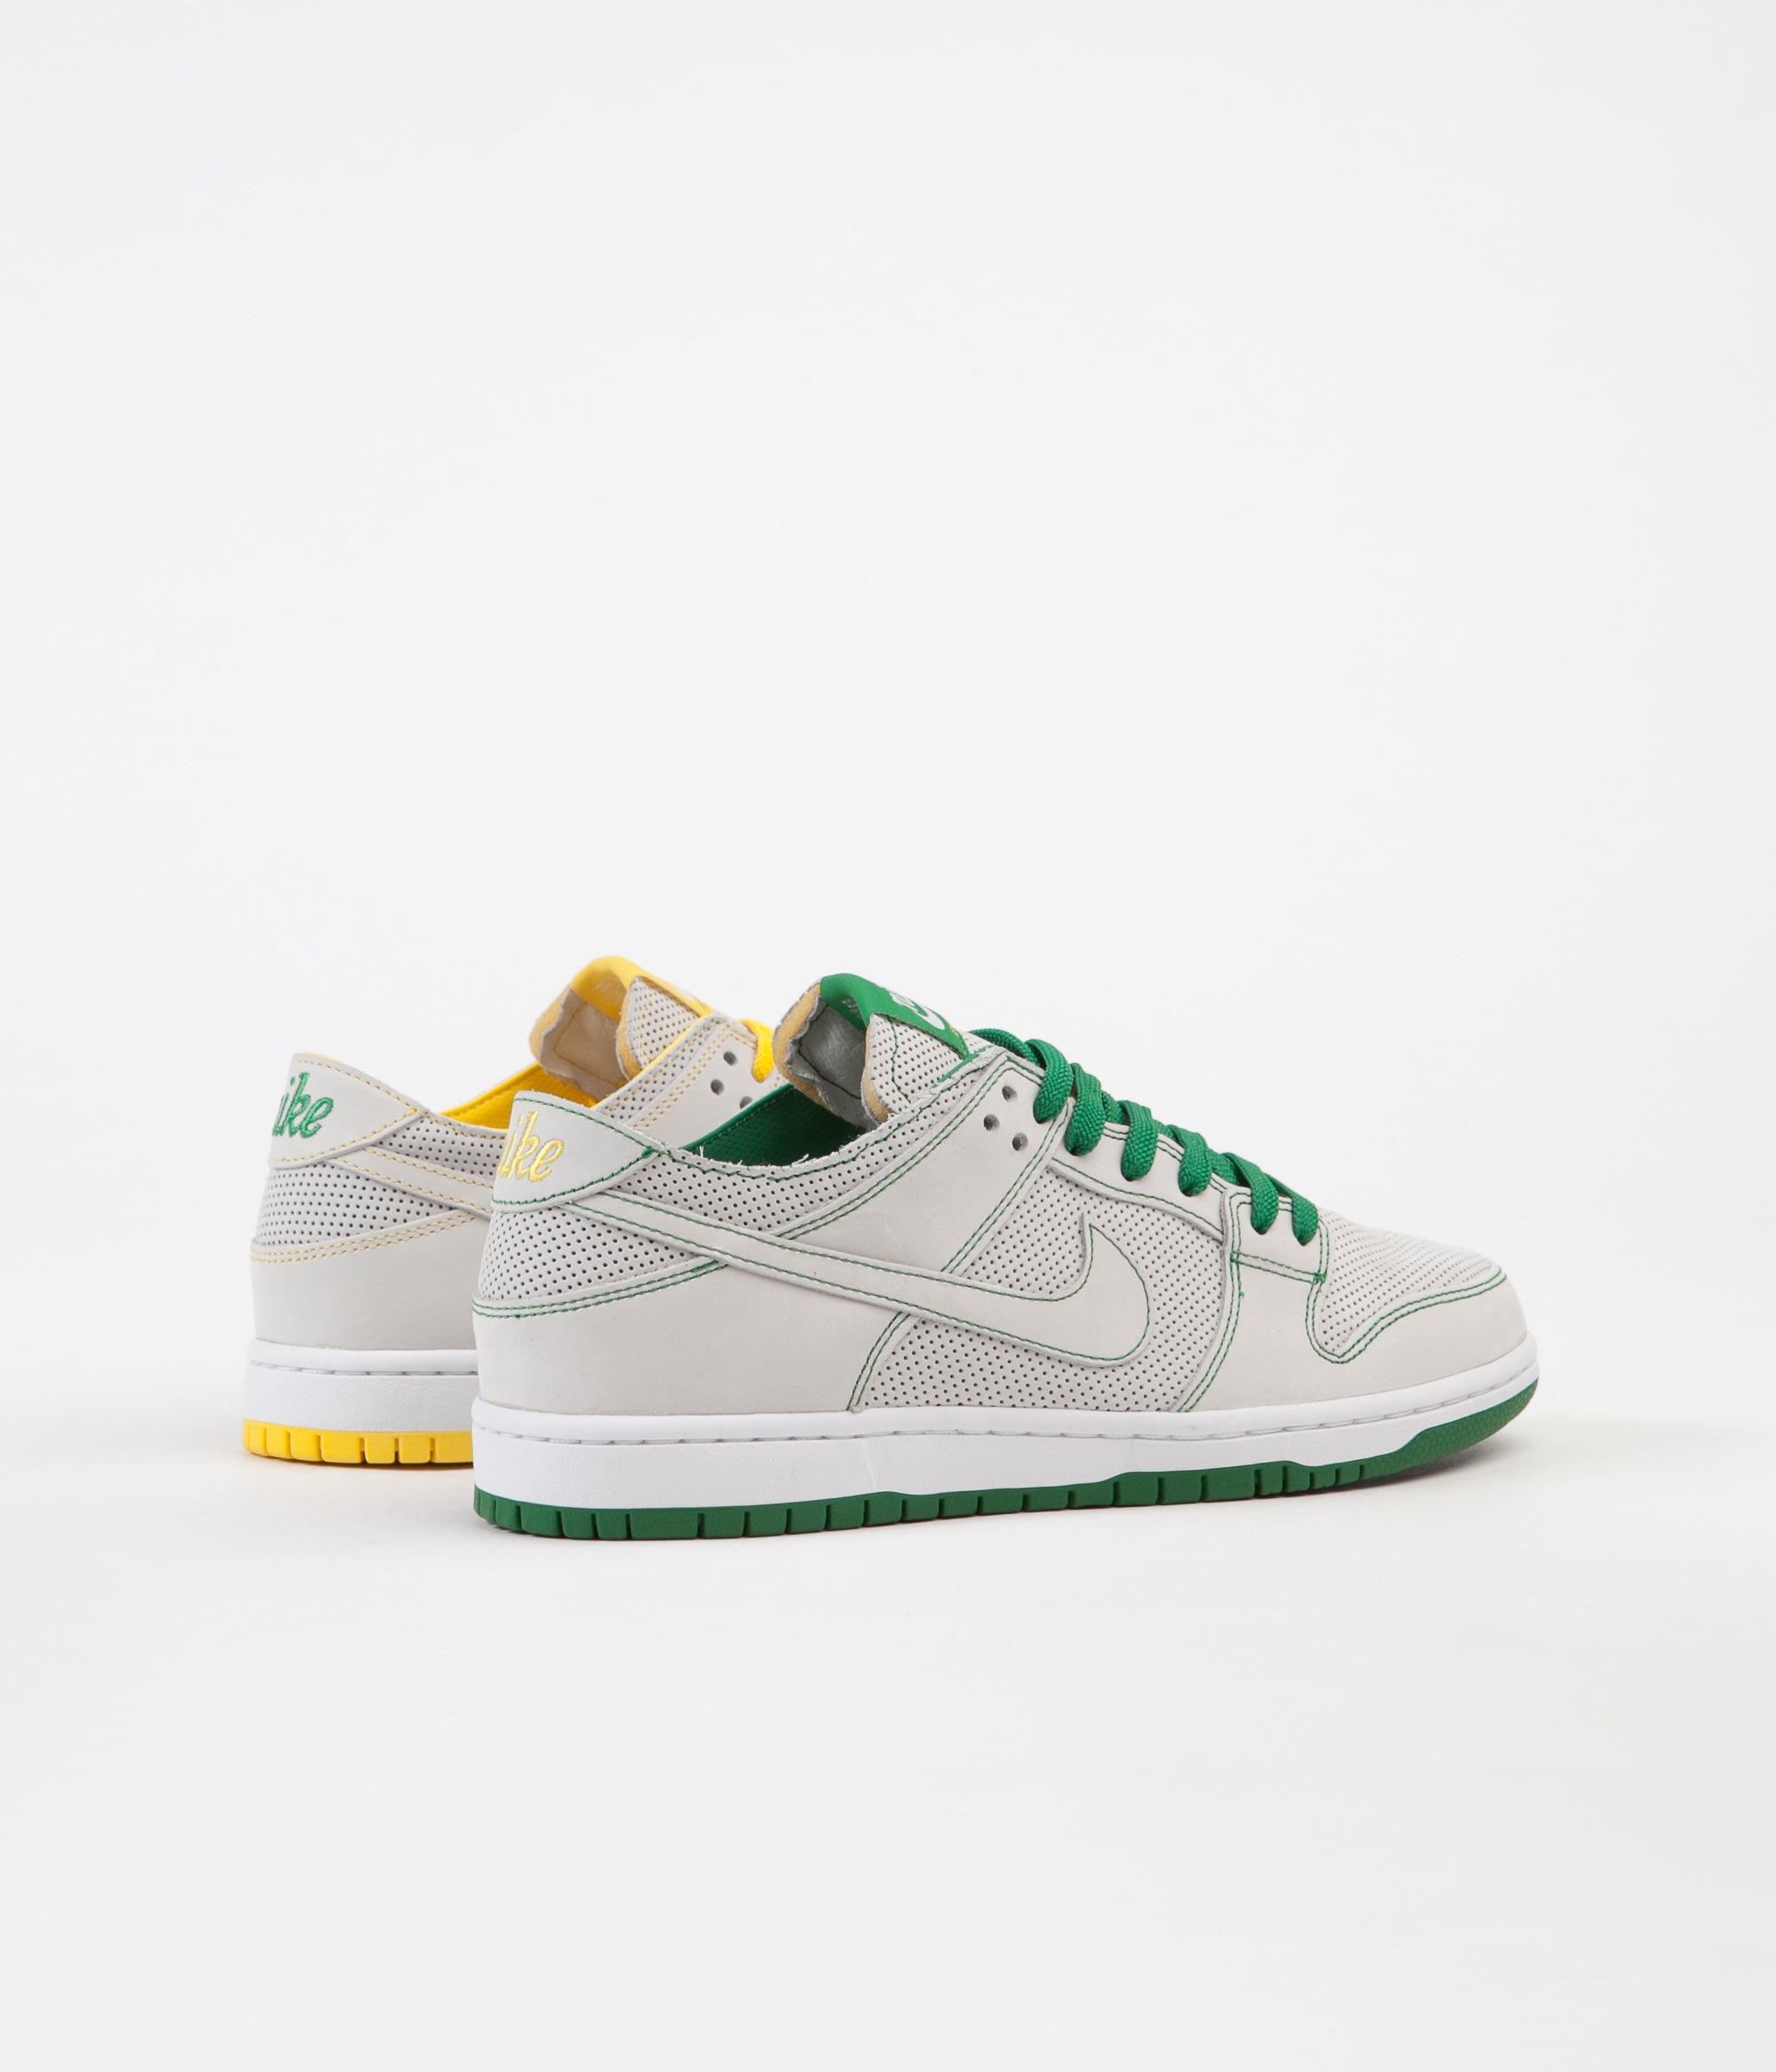 nike sb dunk low pro deconstructed